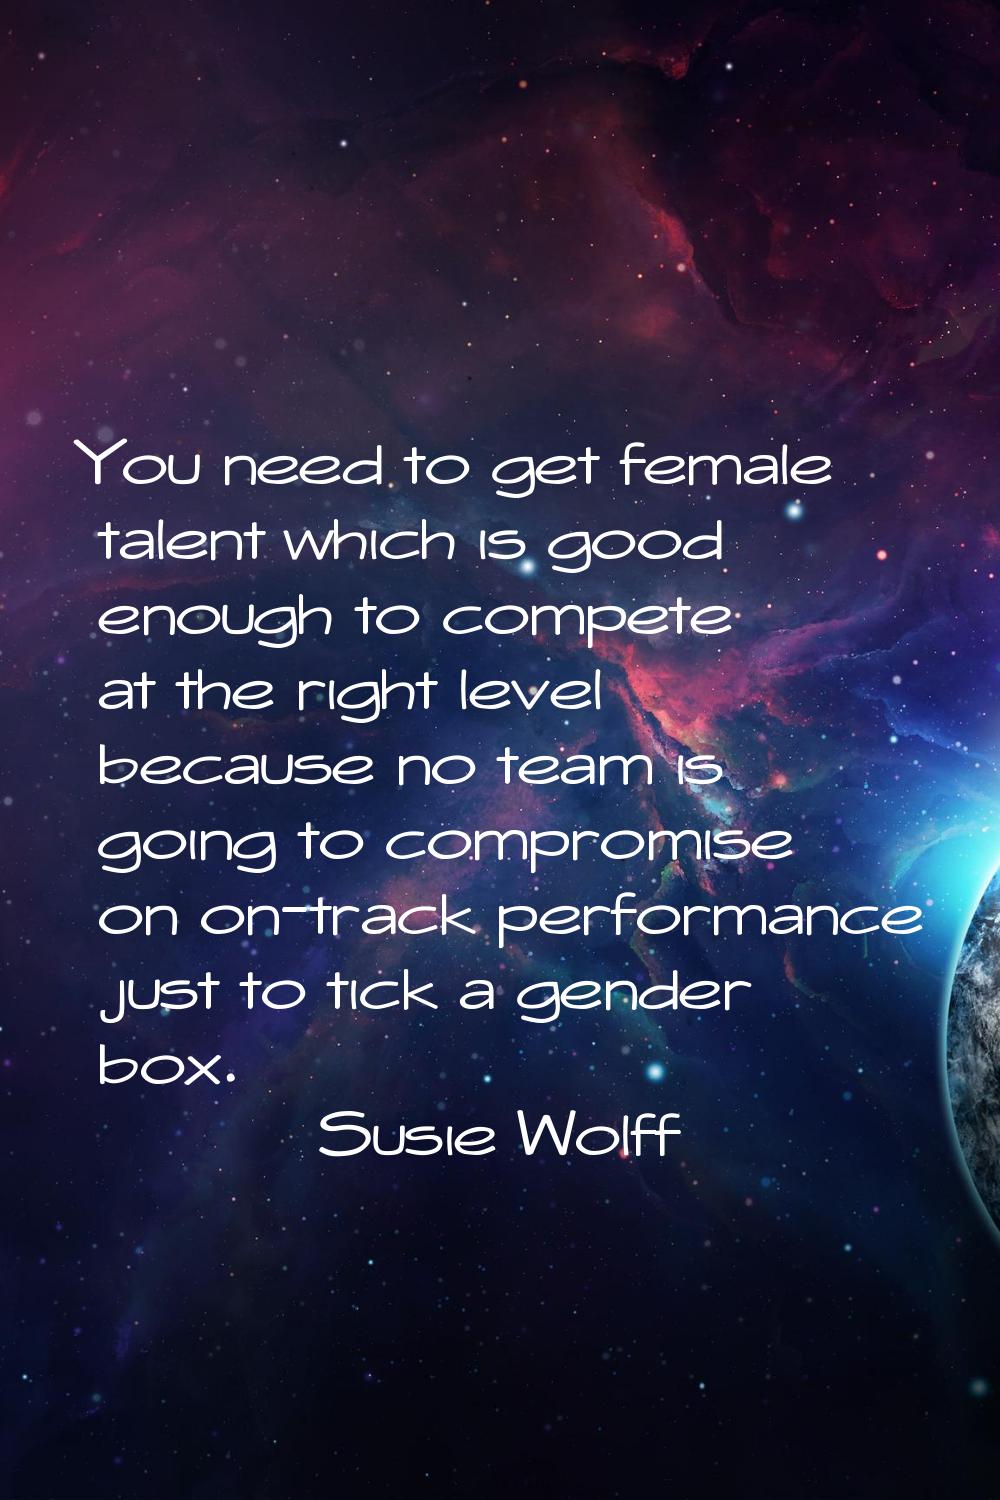 You need to get female talent which is good enough to compete at the right level because no team is